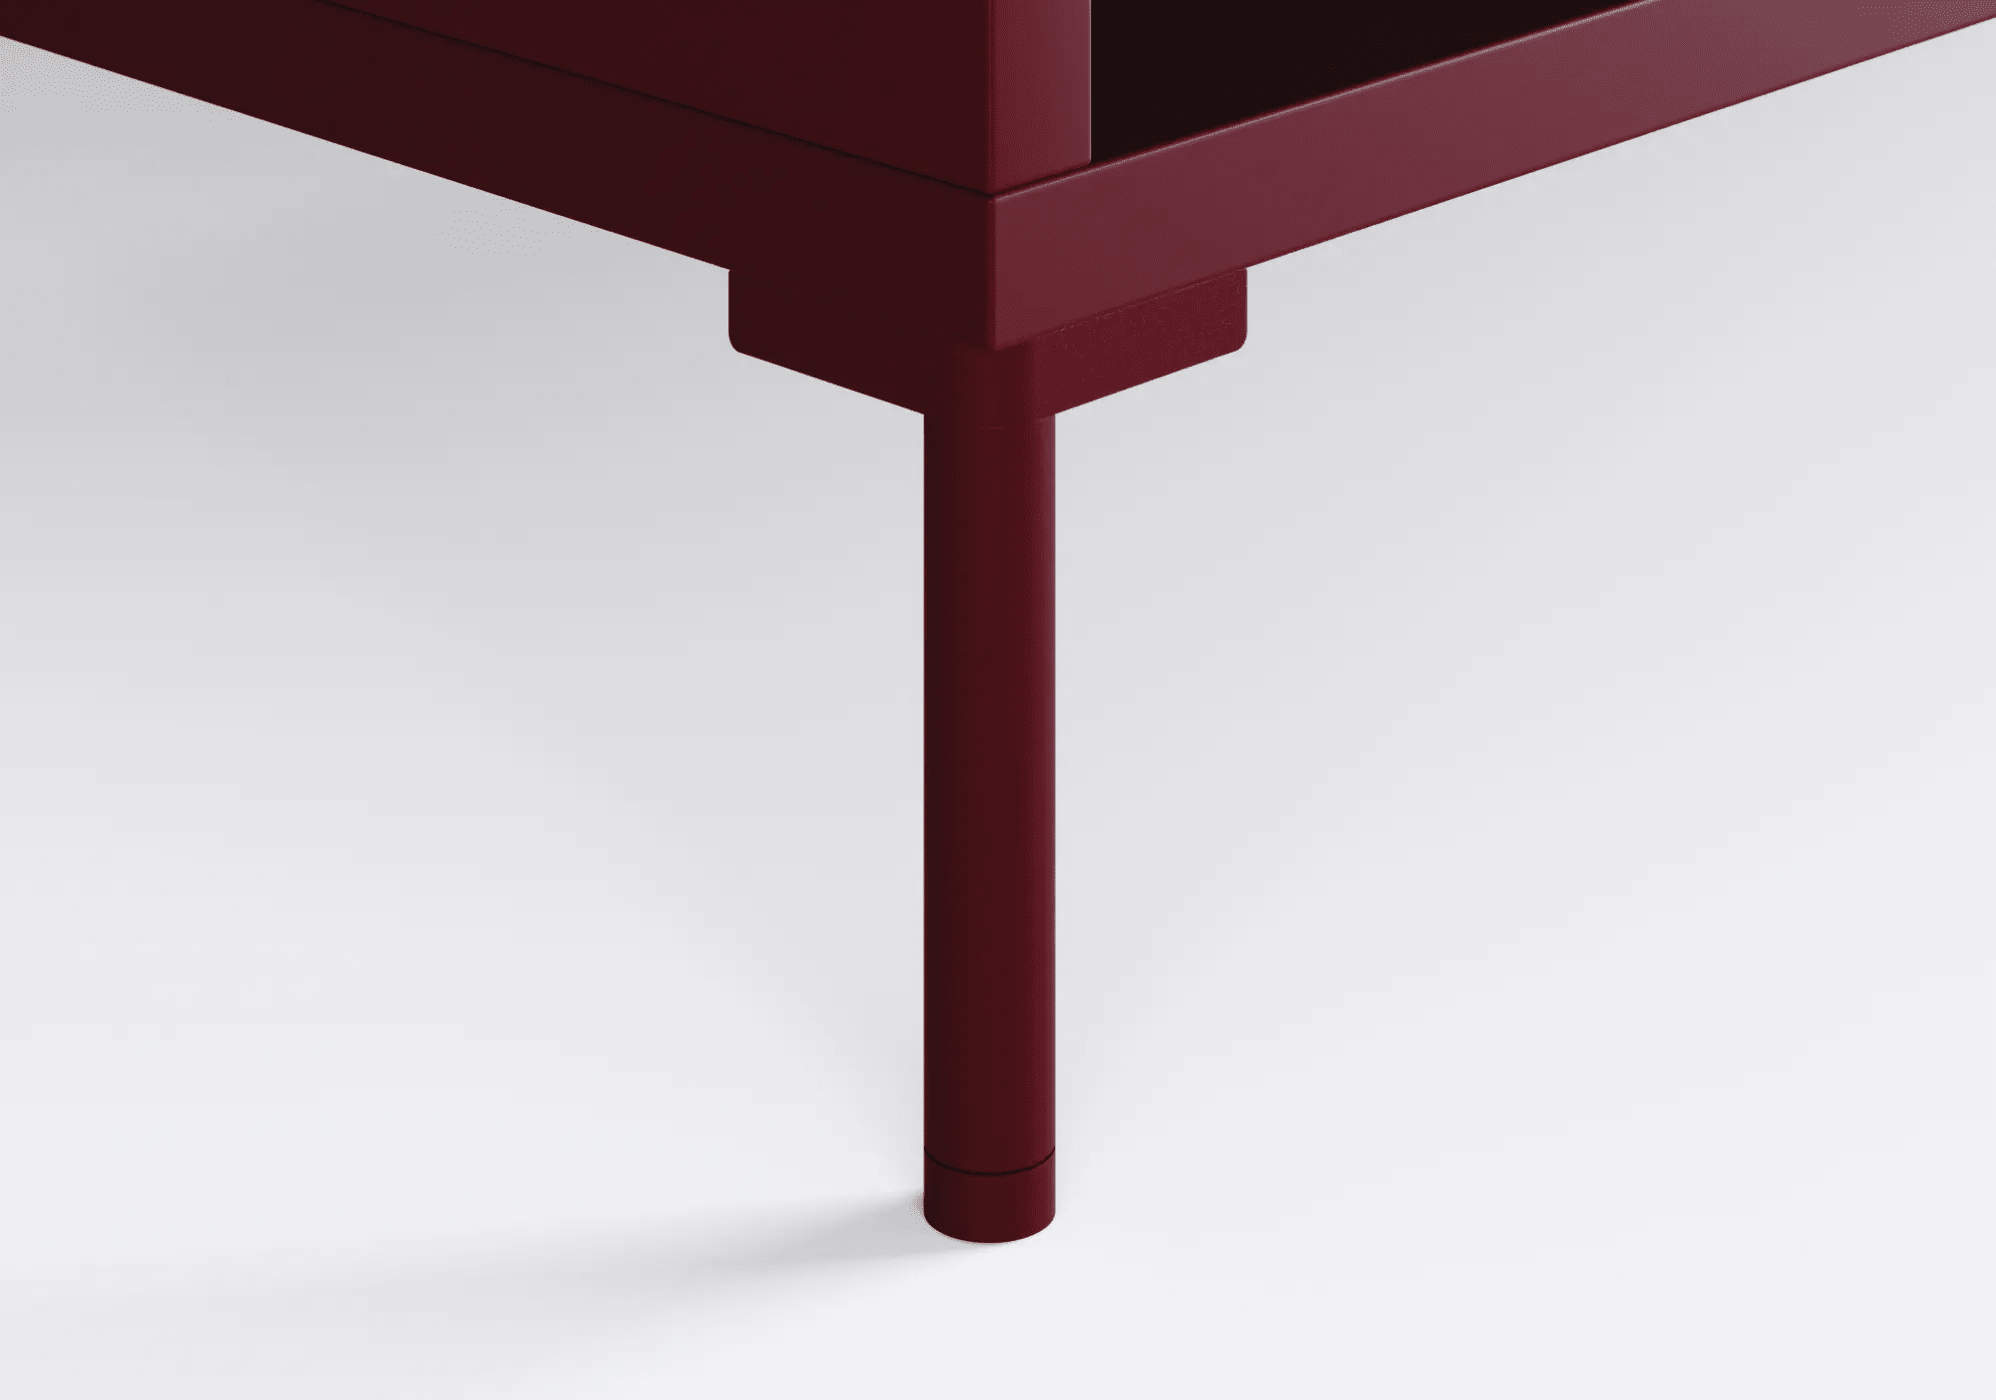 Large Burgundy Red Bedside Table with Drawers, Backpanels and Legs - 78x53x40cm 8